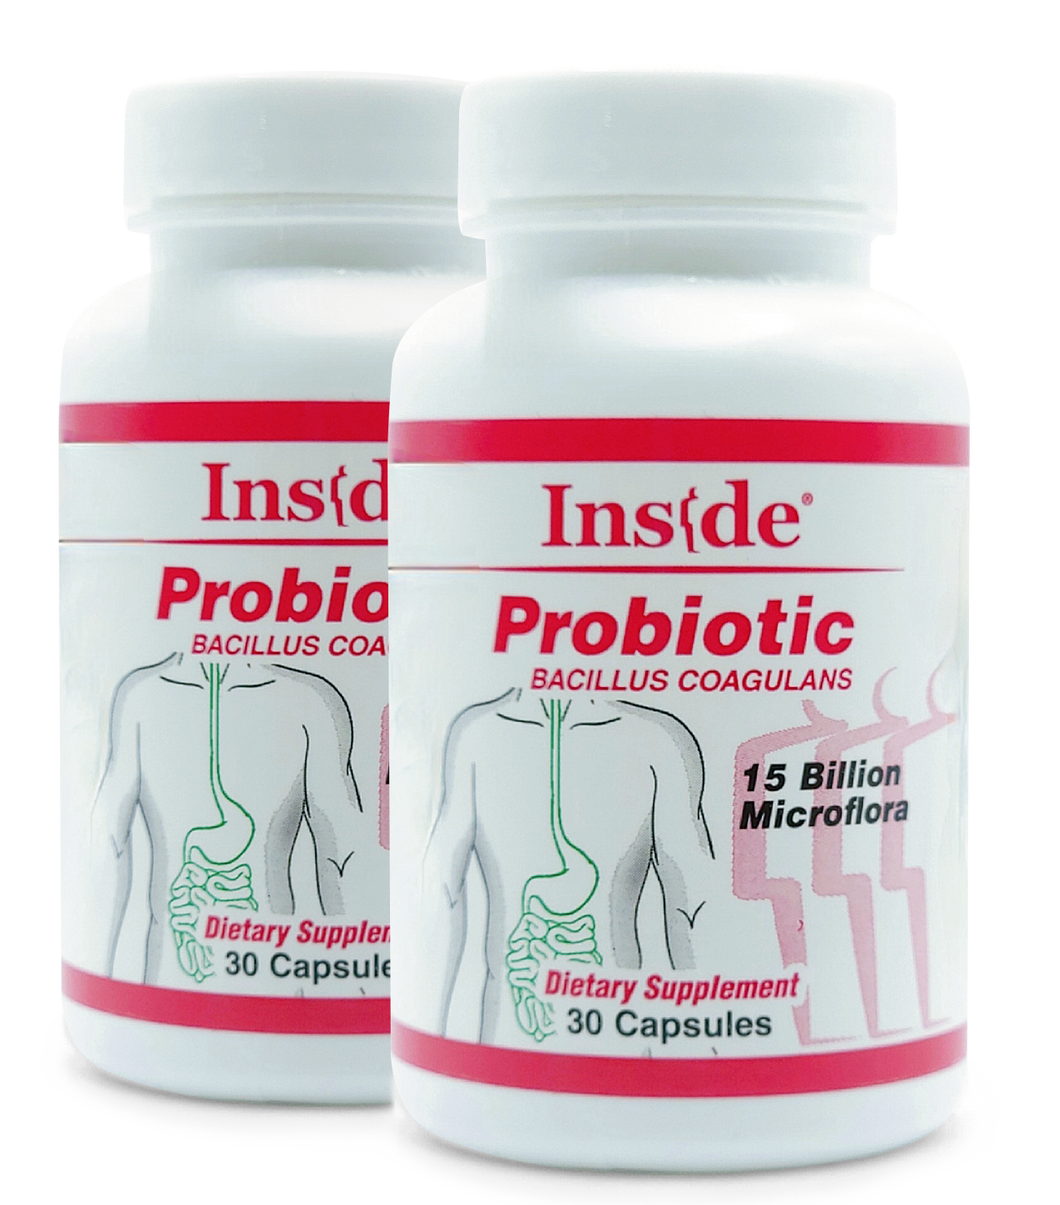 Inside Pharma-Grade Probiotic Bacillus Coagulans Capsules (2 pack) No refrigeration required - 60 Capsules (27% off) 21.6 cents per Capsule!  Buy more and save....see our 4-pack!  Expiration 2025!